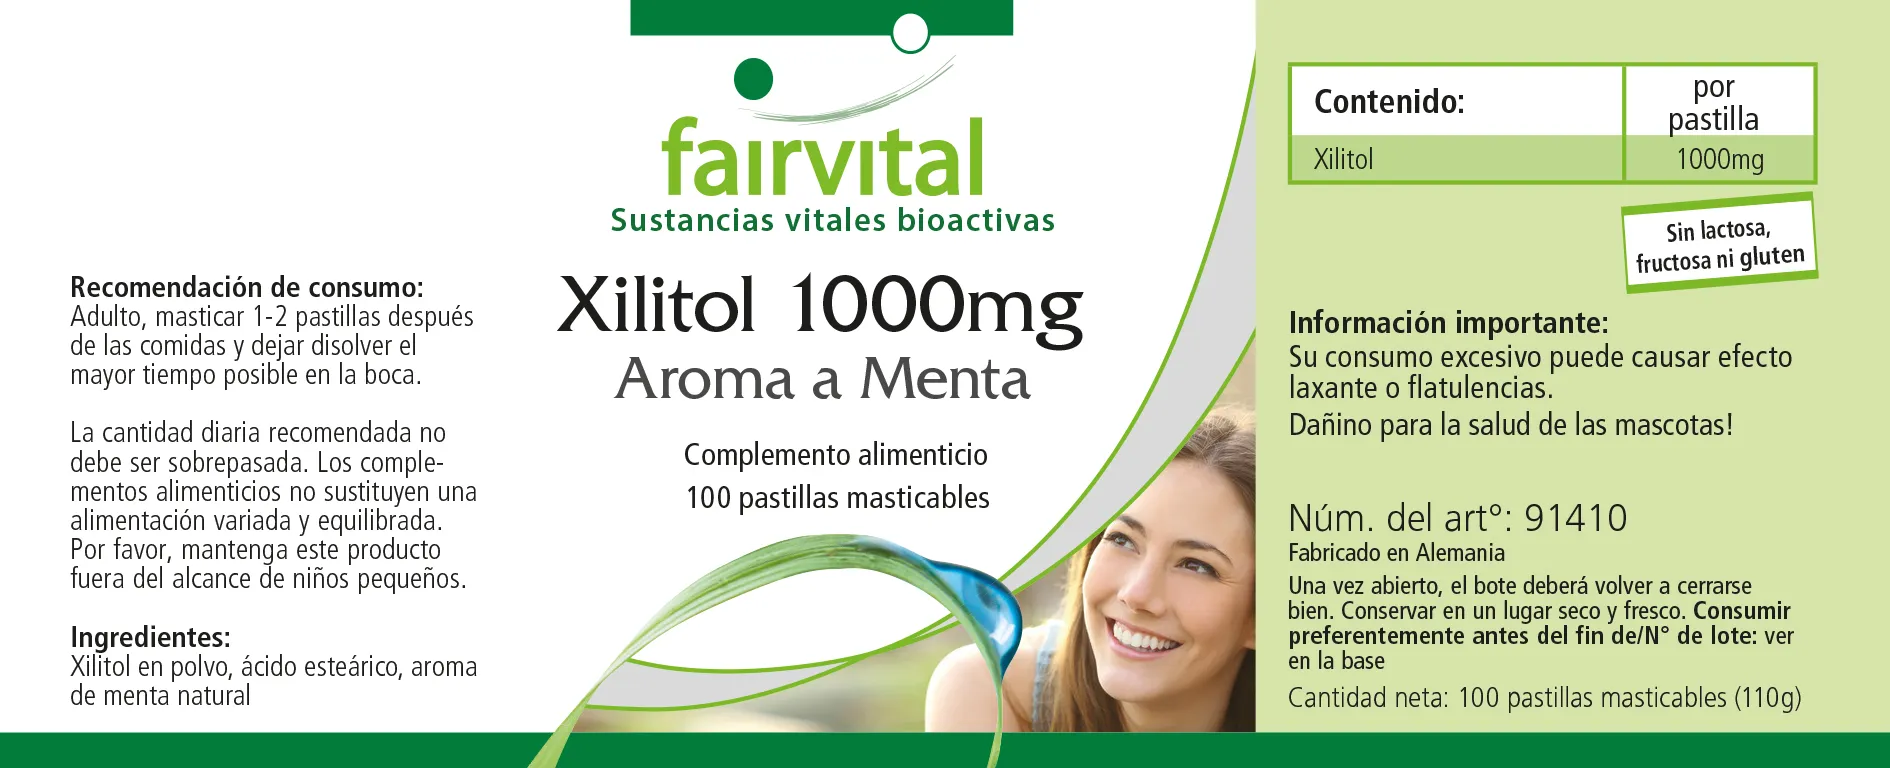 Xylitol 1000mg mint flavoured - 100 chewable tablets